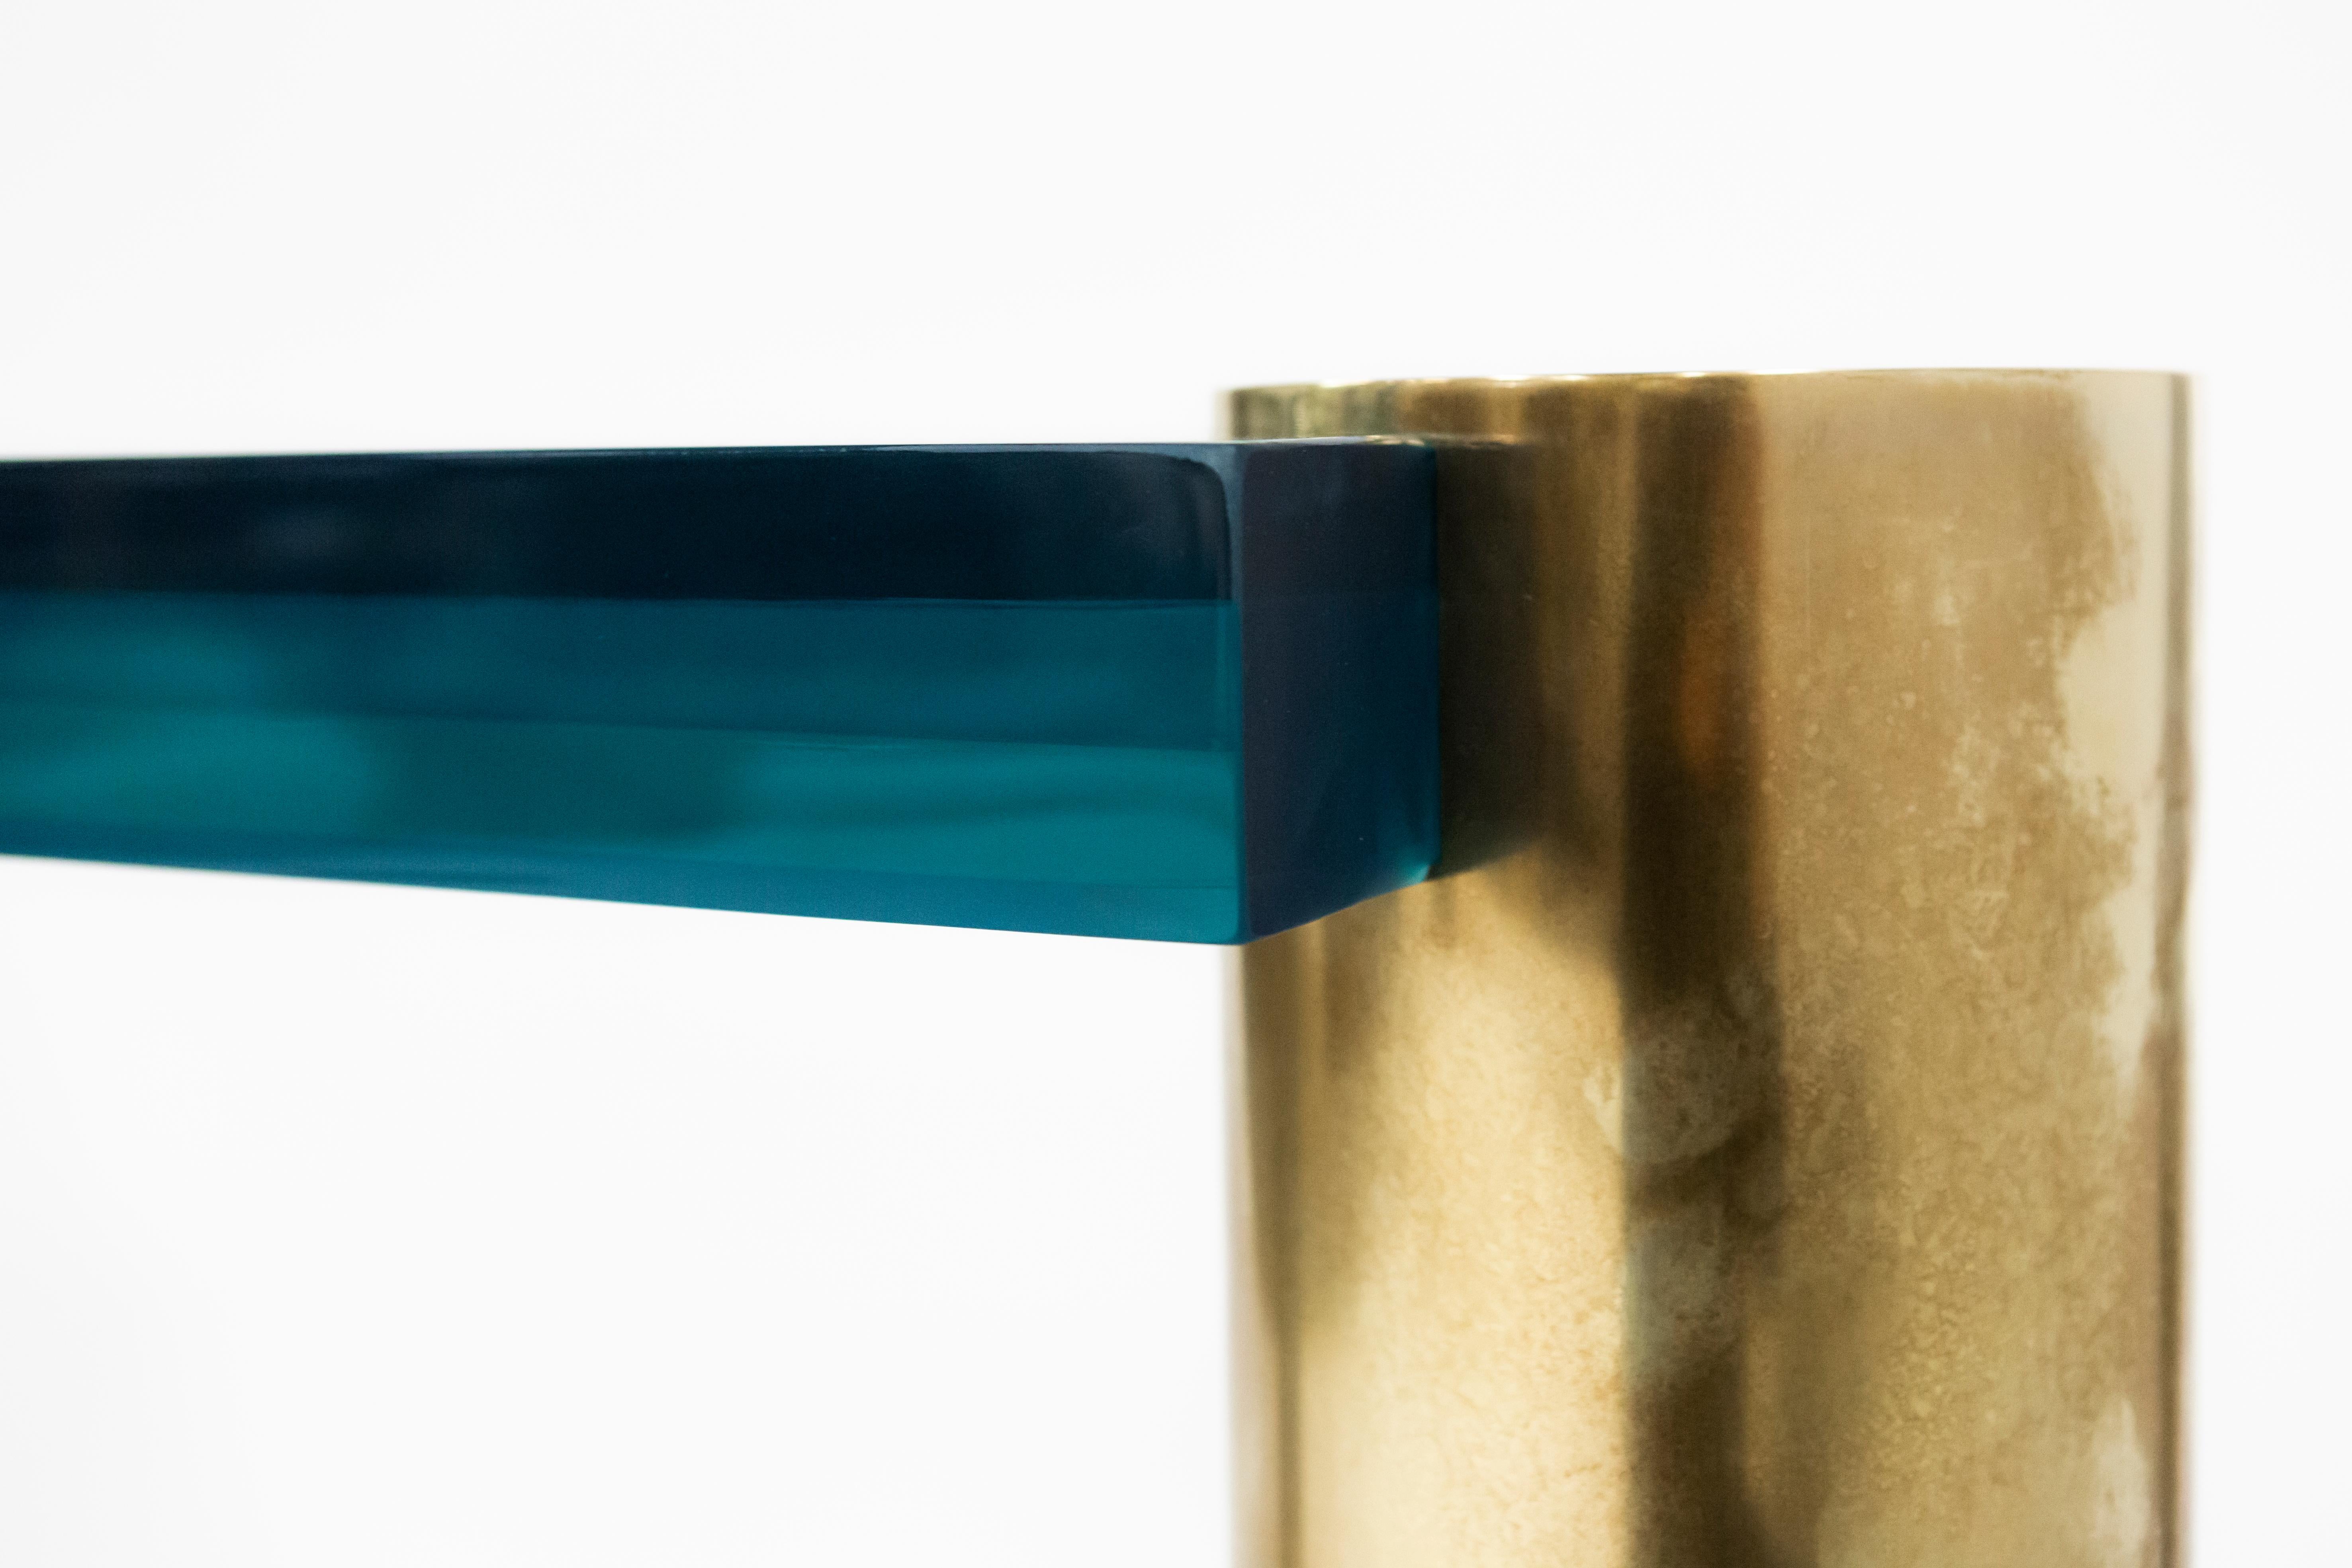 Console by Draga&Aurel Resin Concrete and Brass, 21st Century 5